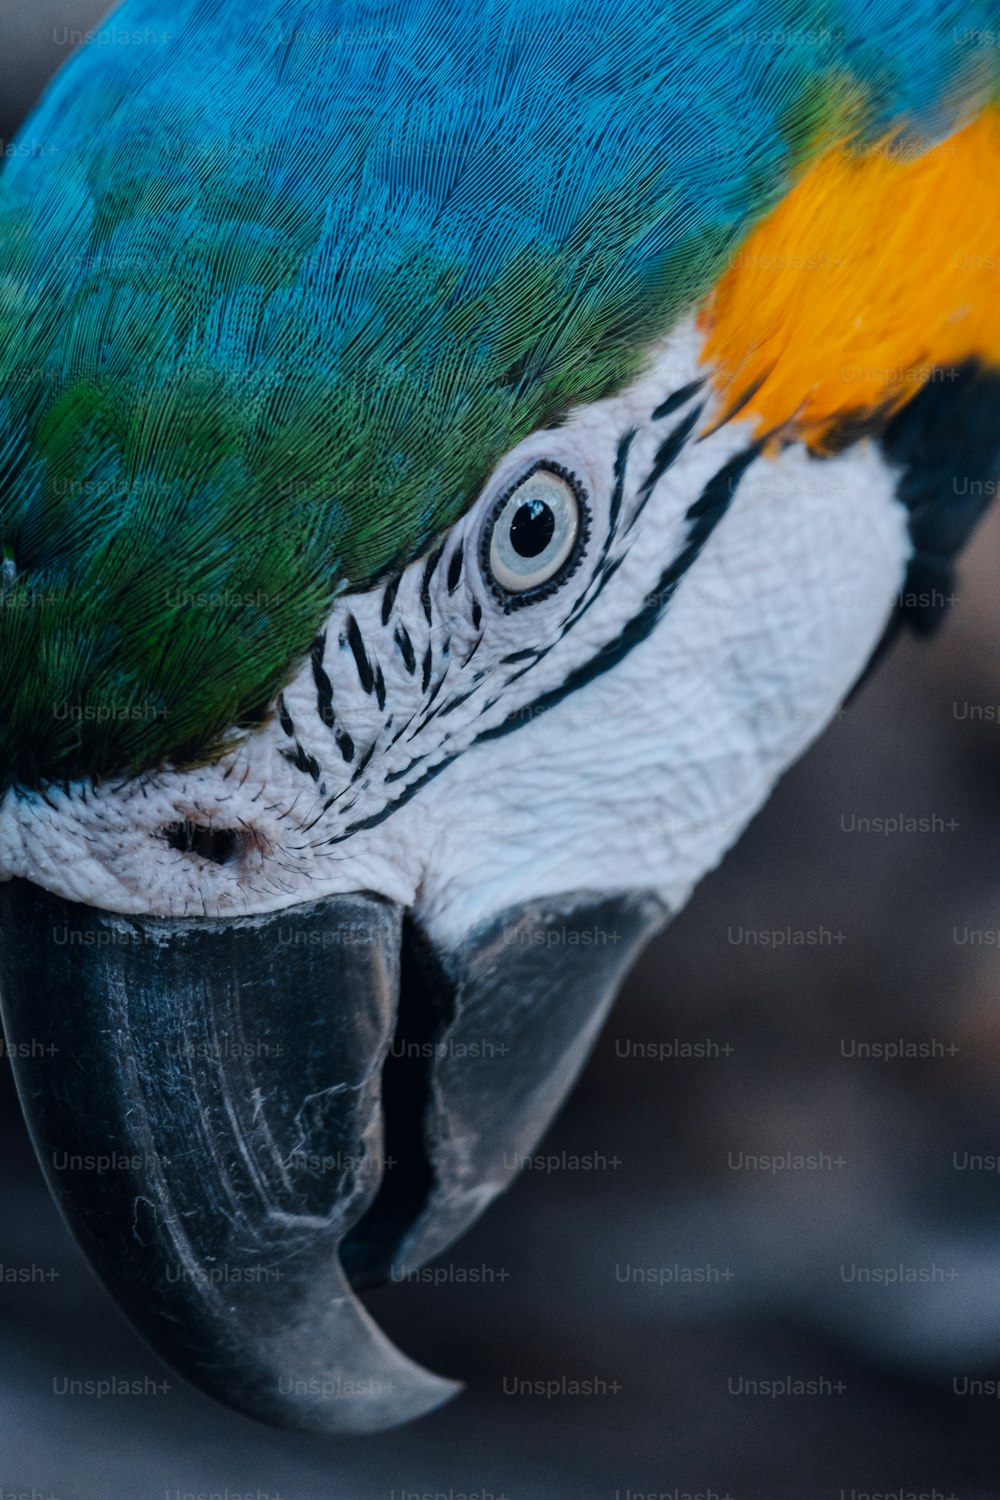 a close up of a blue and yellow parrot's head